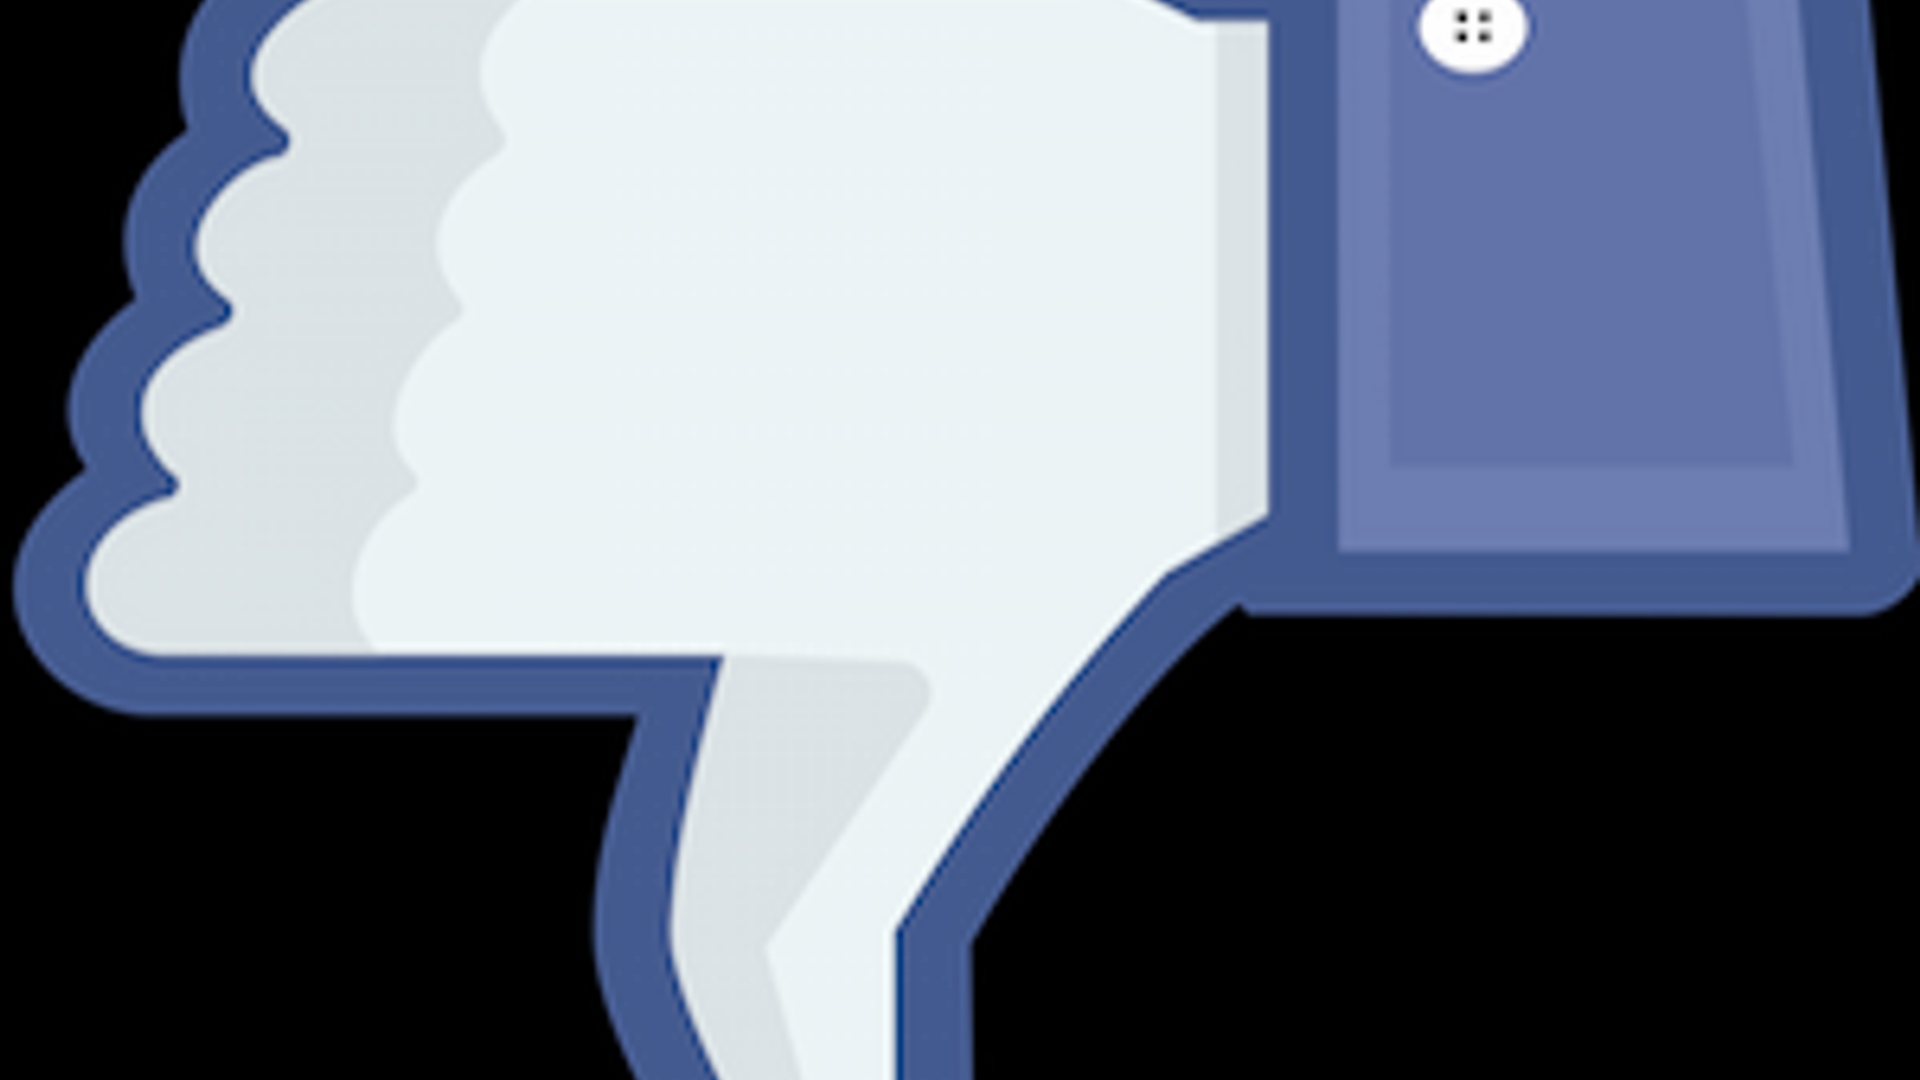 Not_facebook_not_like_thumbs_down.png